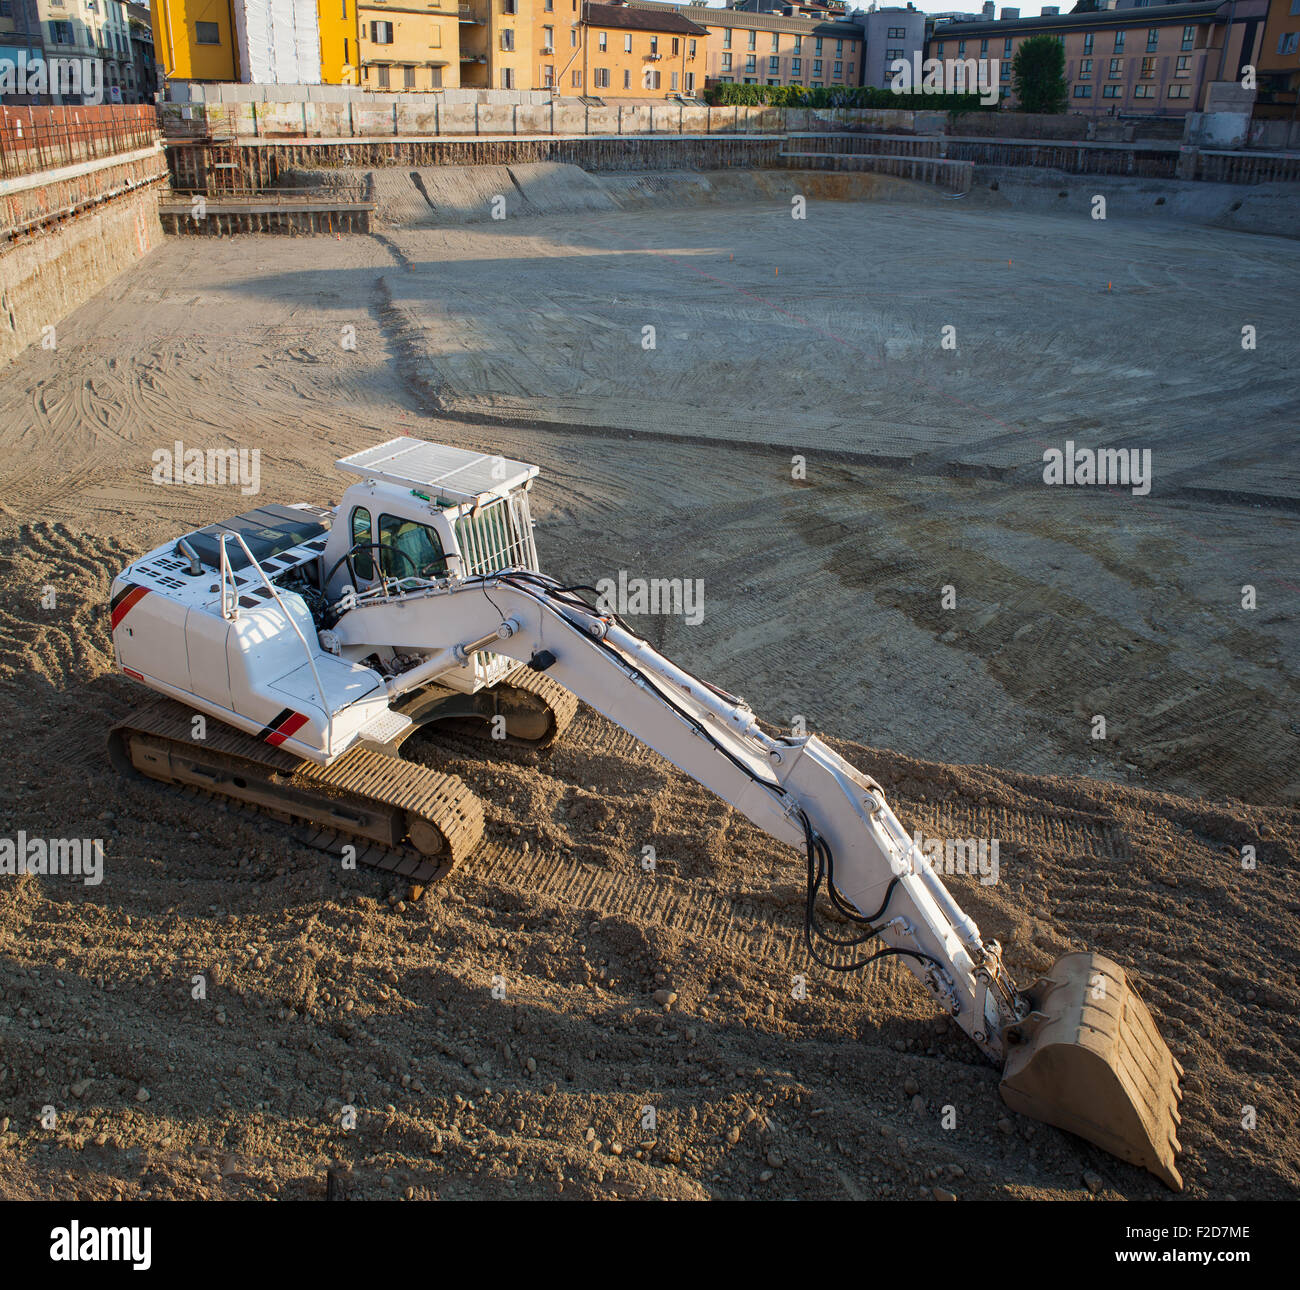 View of white excavator on the construction site Stock Photo